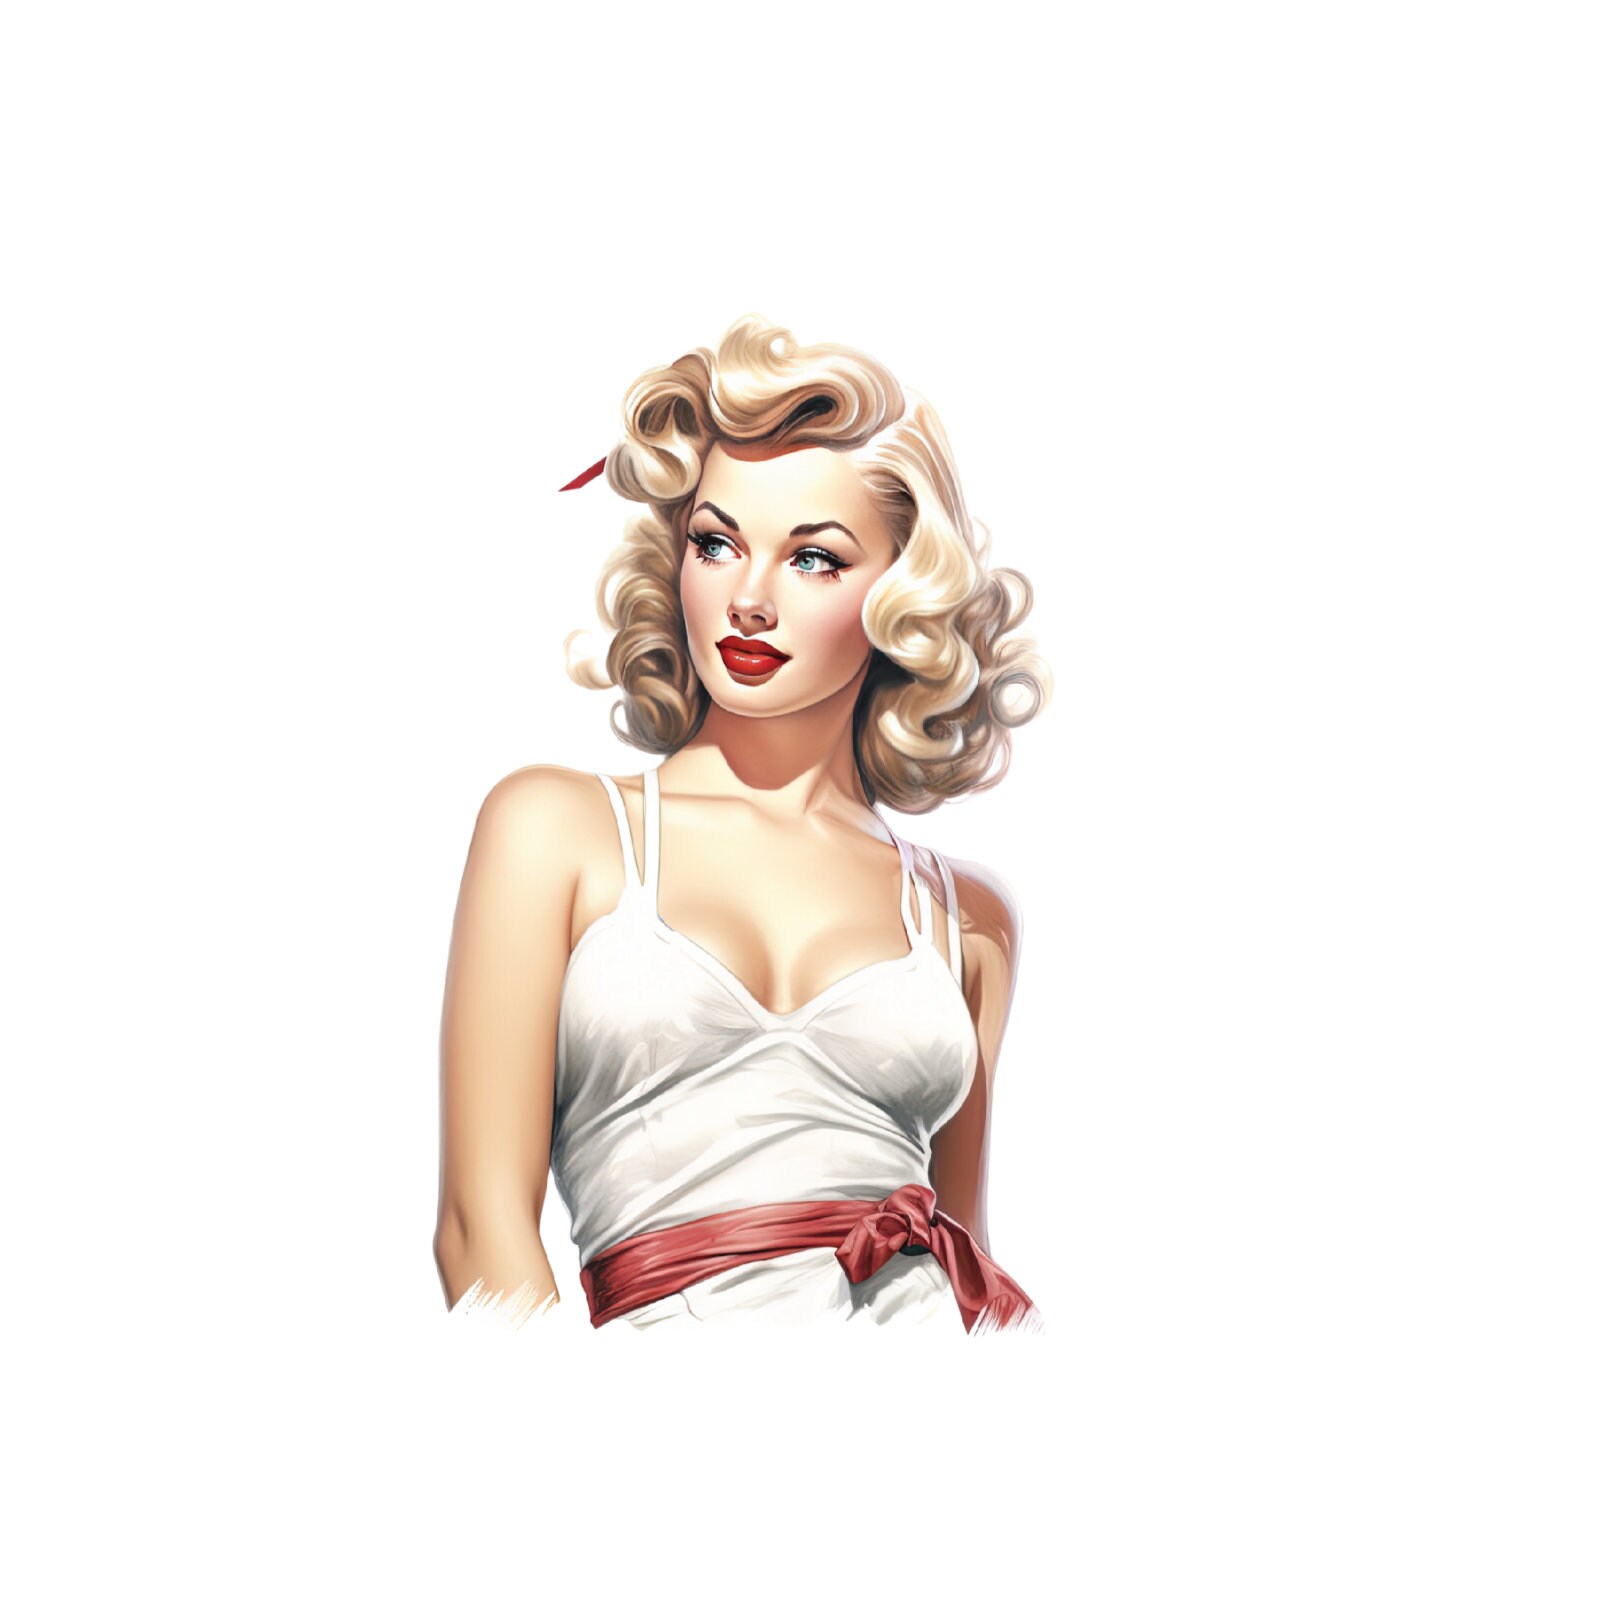 Vintage Style Pin Up Girl Sticker P55 Pinup Girl Sticker